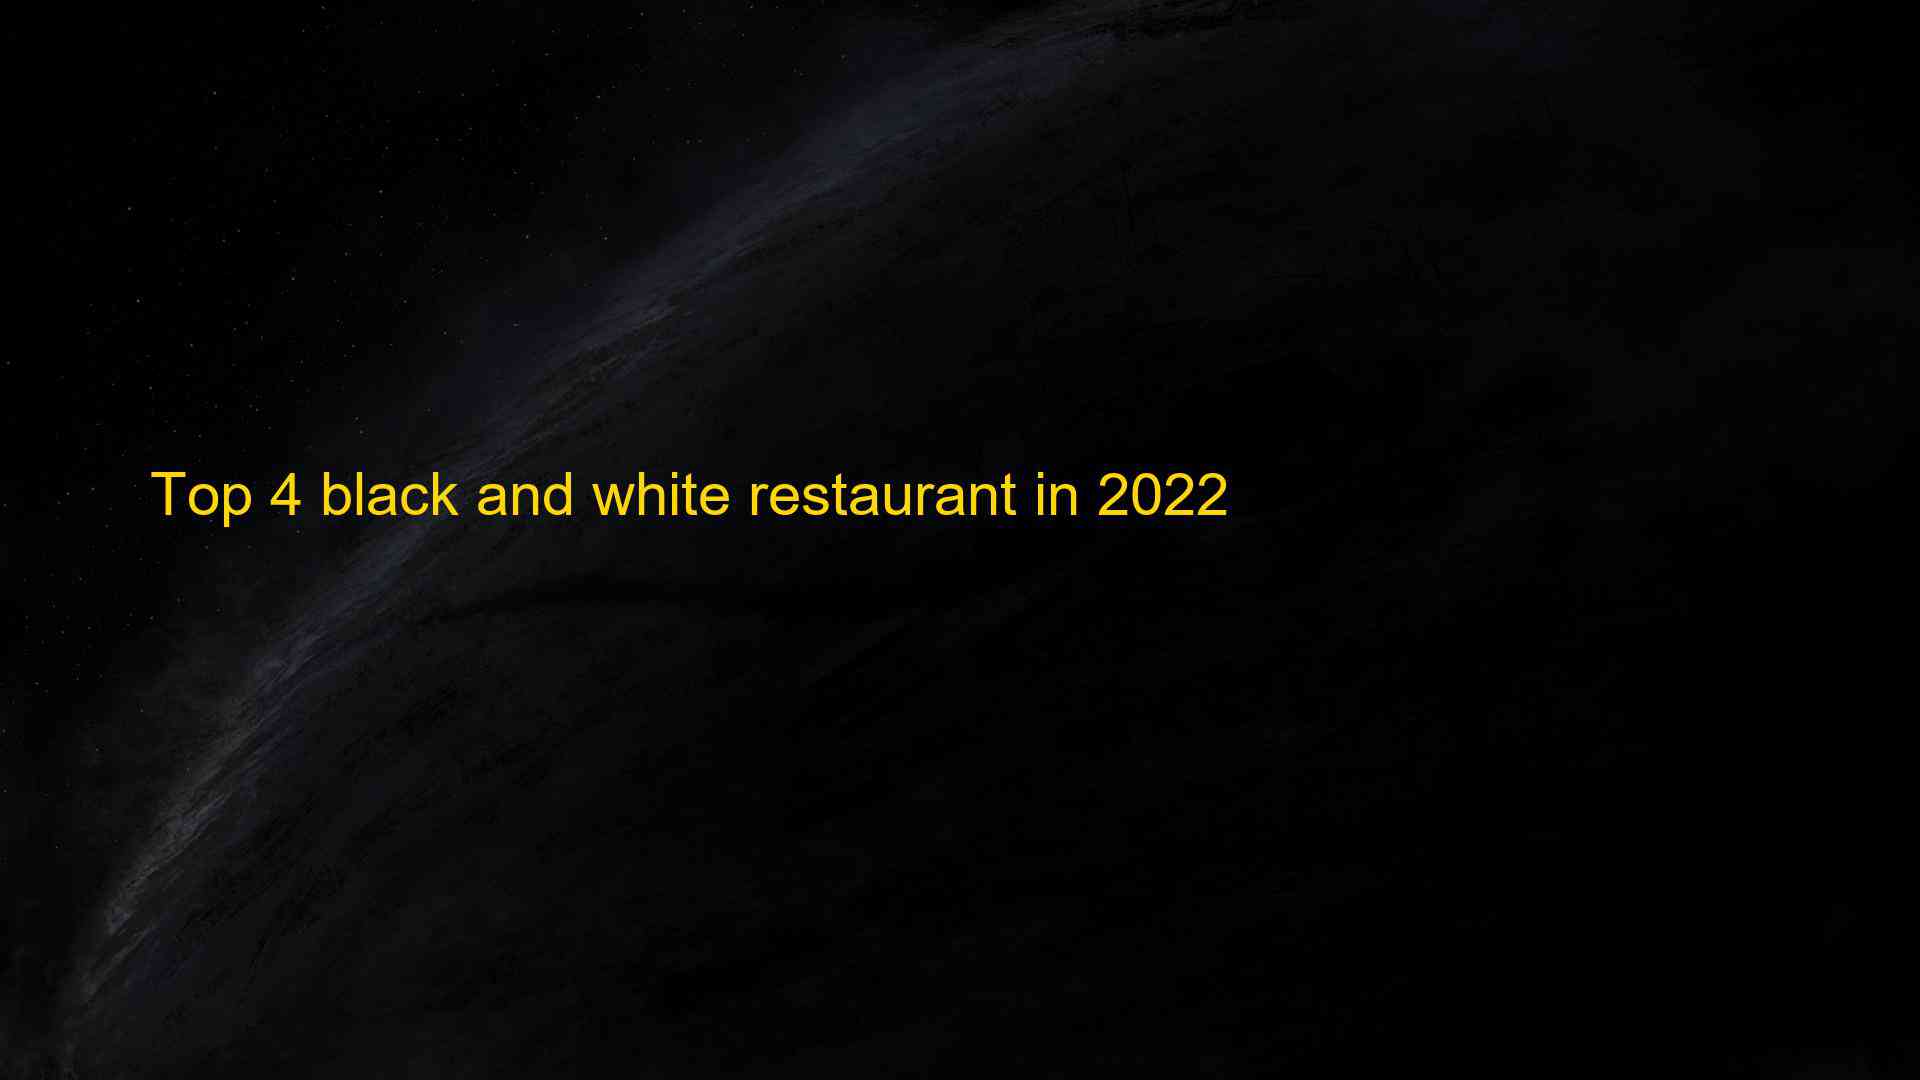 Top 4 black and white restaurant in 2022 1663545103